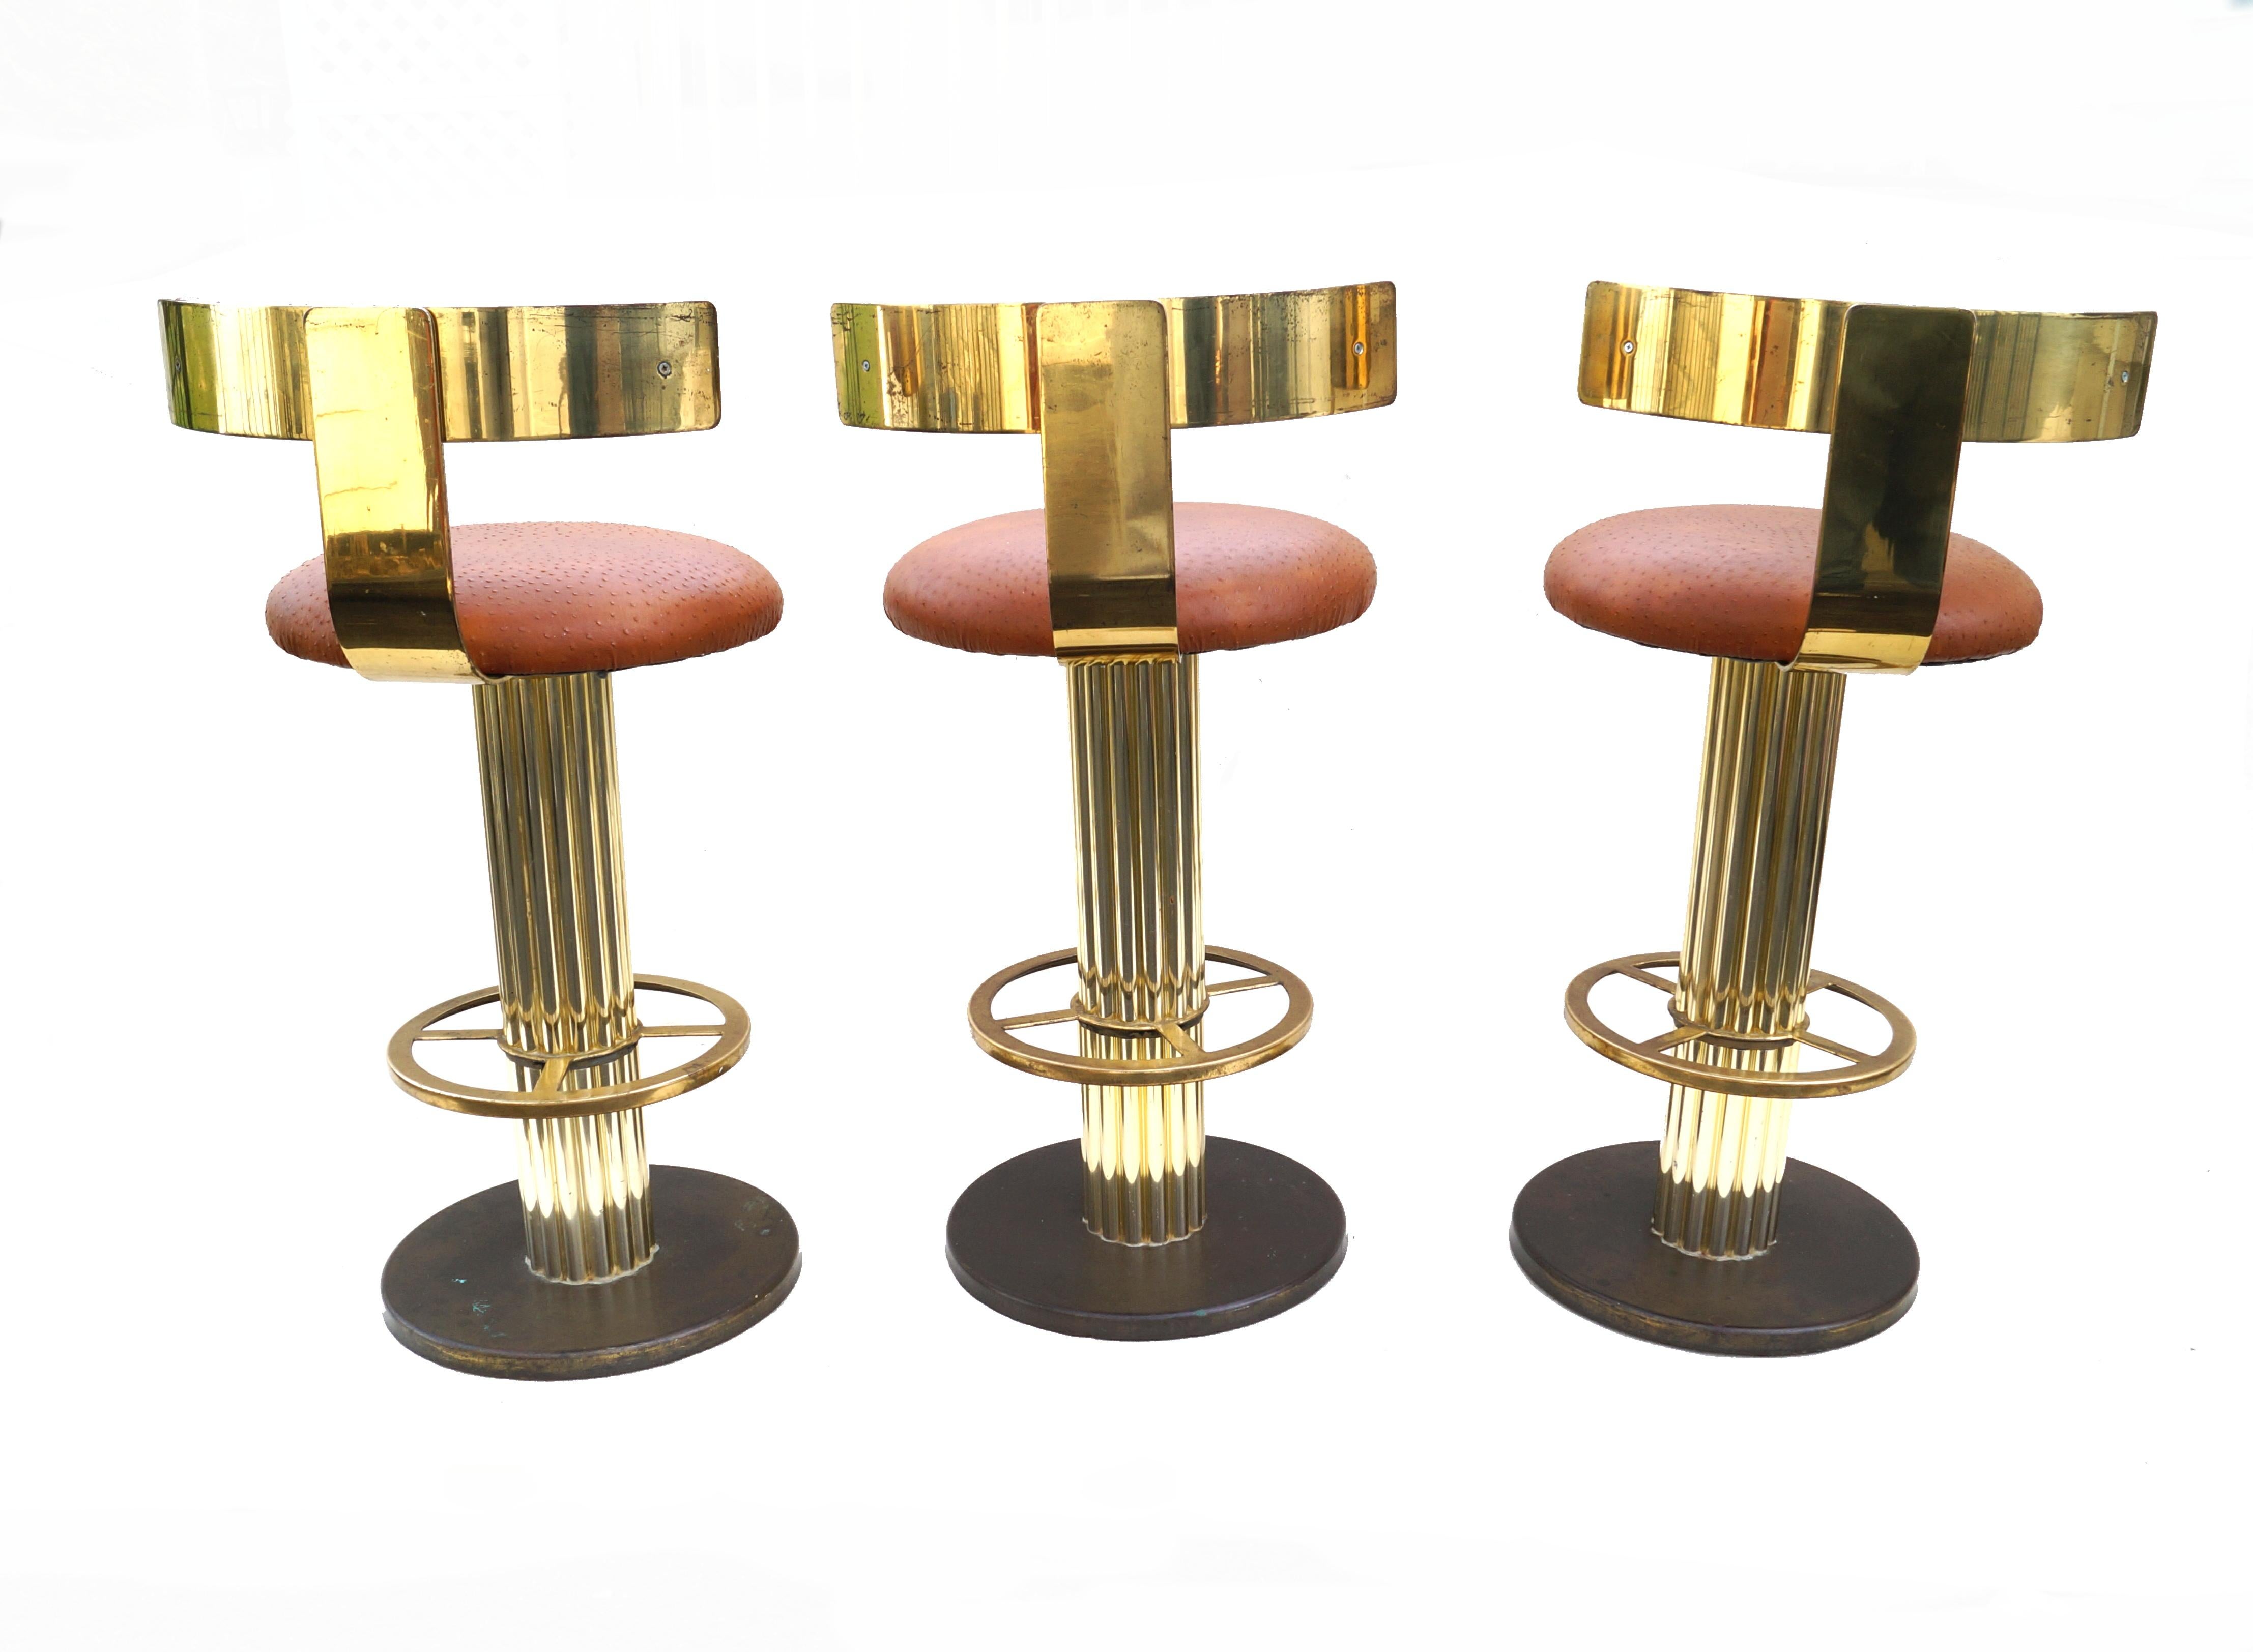 Late 20th Century Modern Design For Leisure Ostrich Brass Bar Stools Set of 3 Barstool